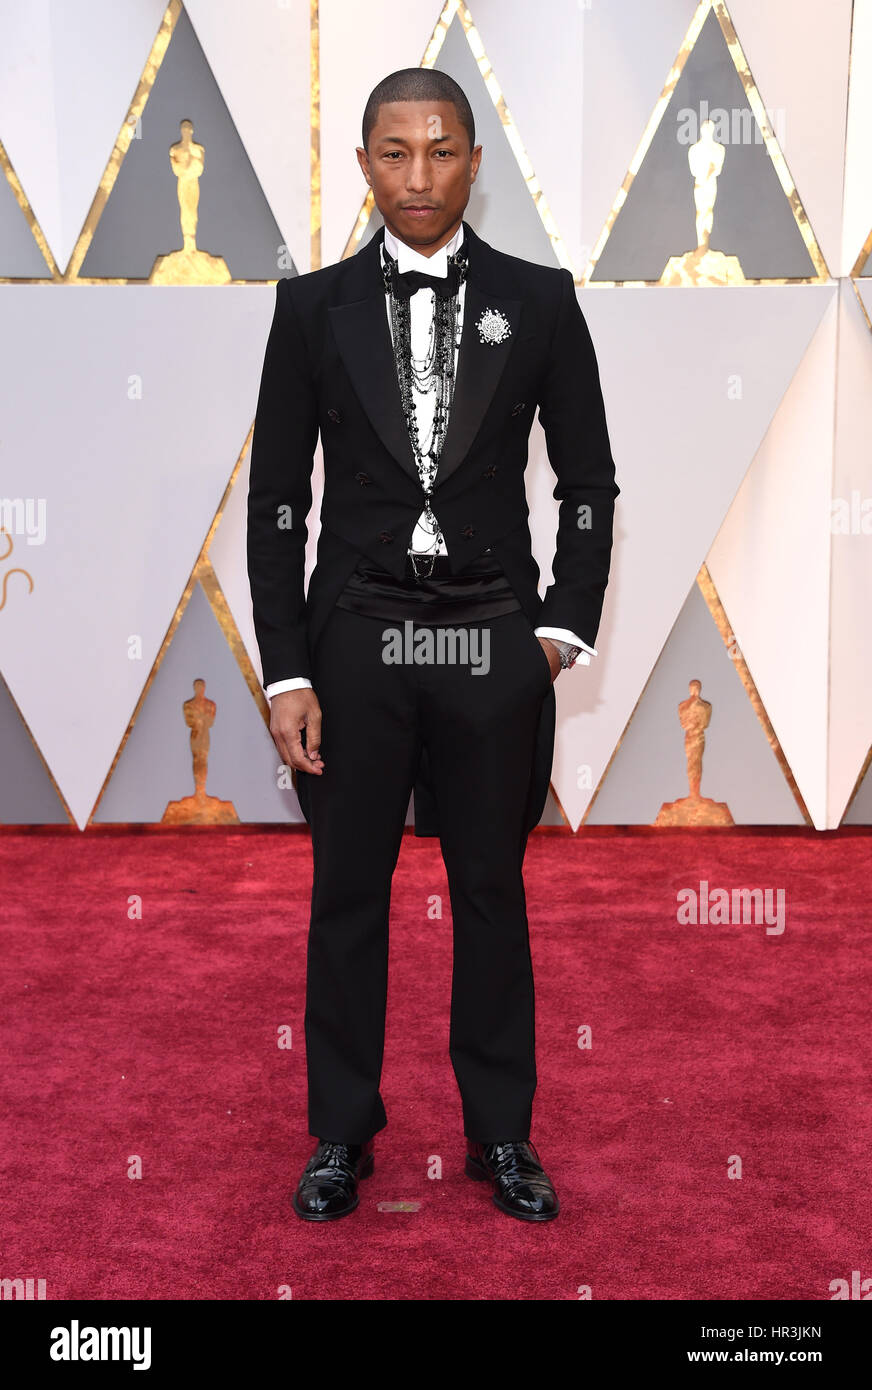 Hollywood, California, USA. 26th Feb, 2017. PHARRELL WILLIAMS during red carpet arrivals for the 89th Academy Awards ceremony. Credit: Lisa O'Connor/ZUMA Wire/Alamy Live News Stock Photo